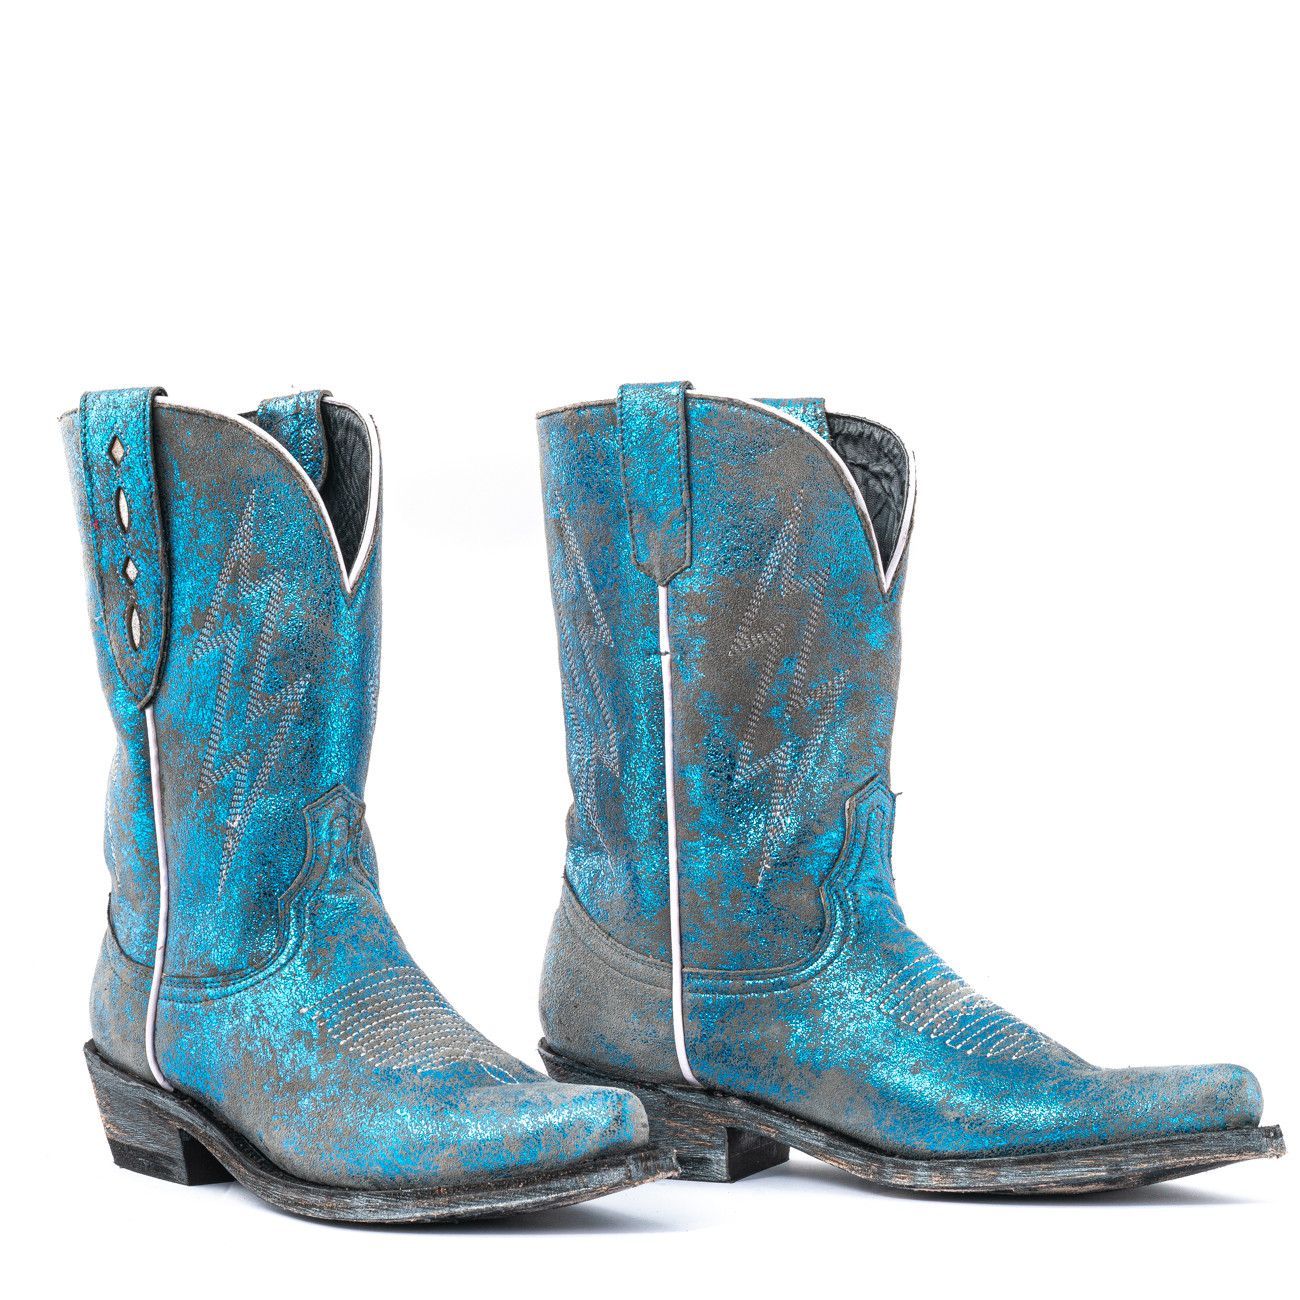 VICTORIA ORBIT BLUE                     THIS STYLE RUNS SMALL, ORDER 1 SIZE UP THAN YOUR USUAL SIZE              ANKLE BOOTS WIT